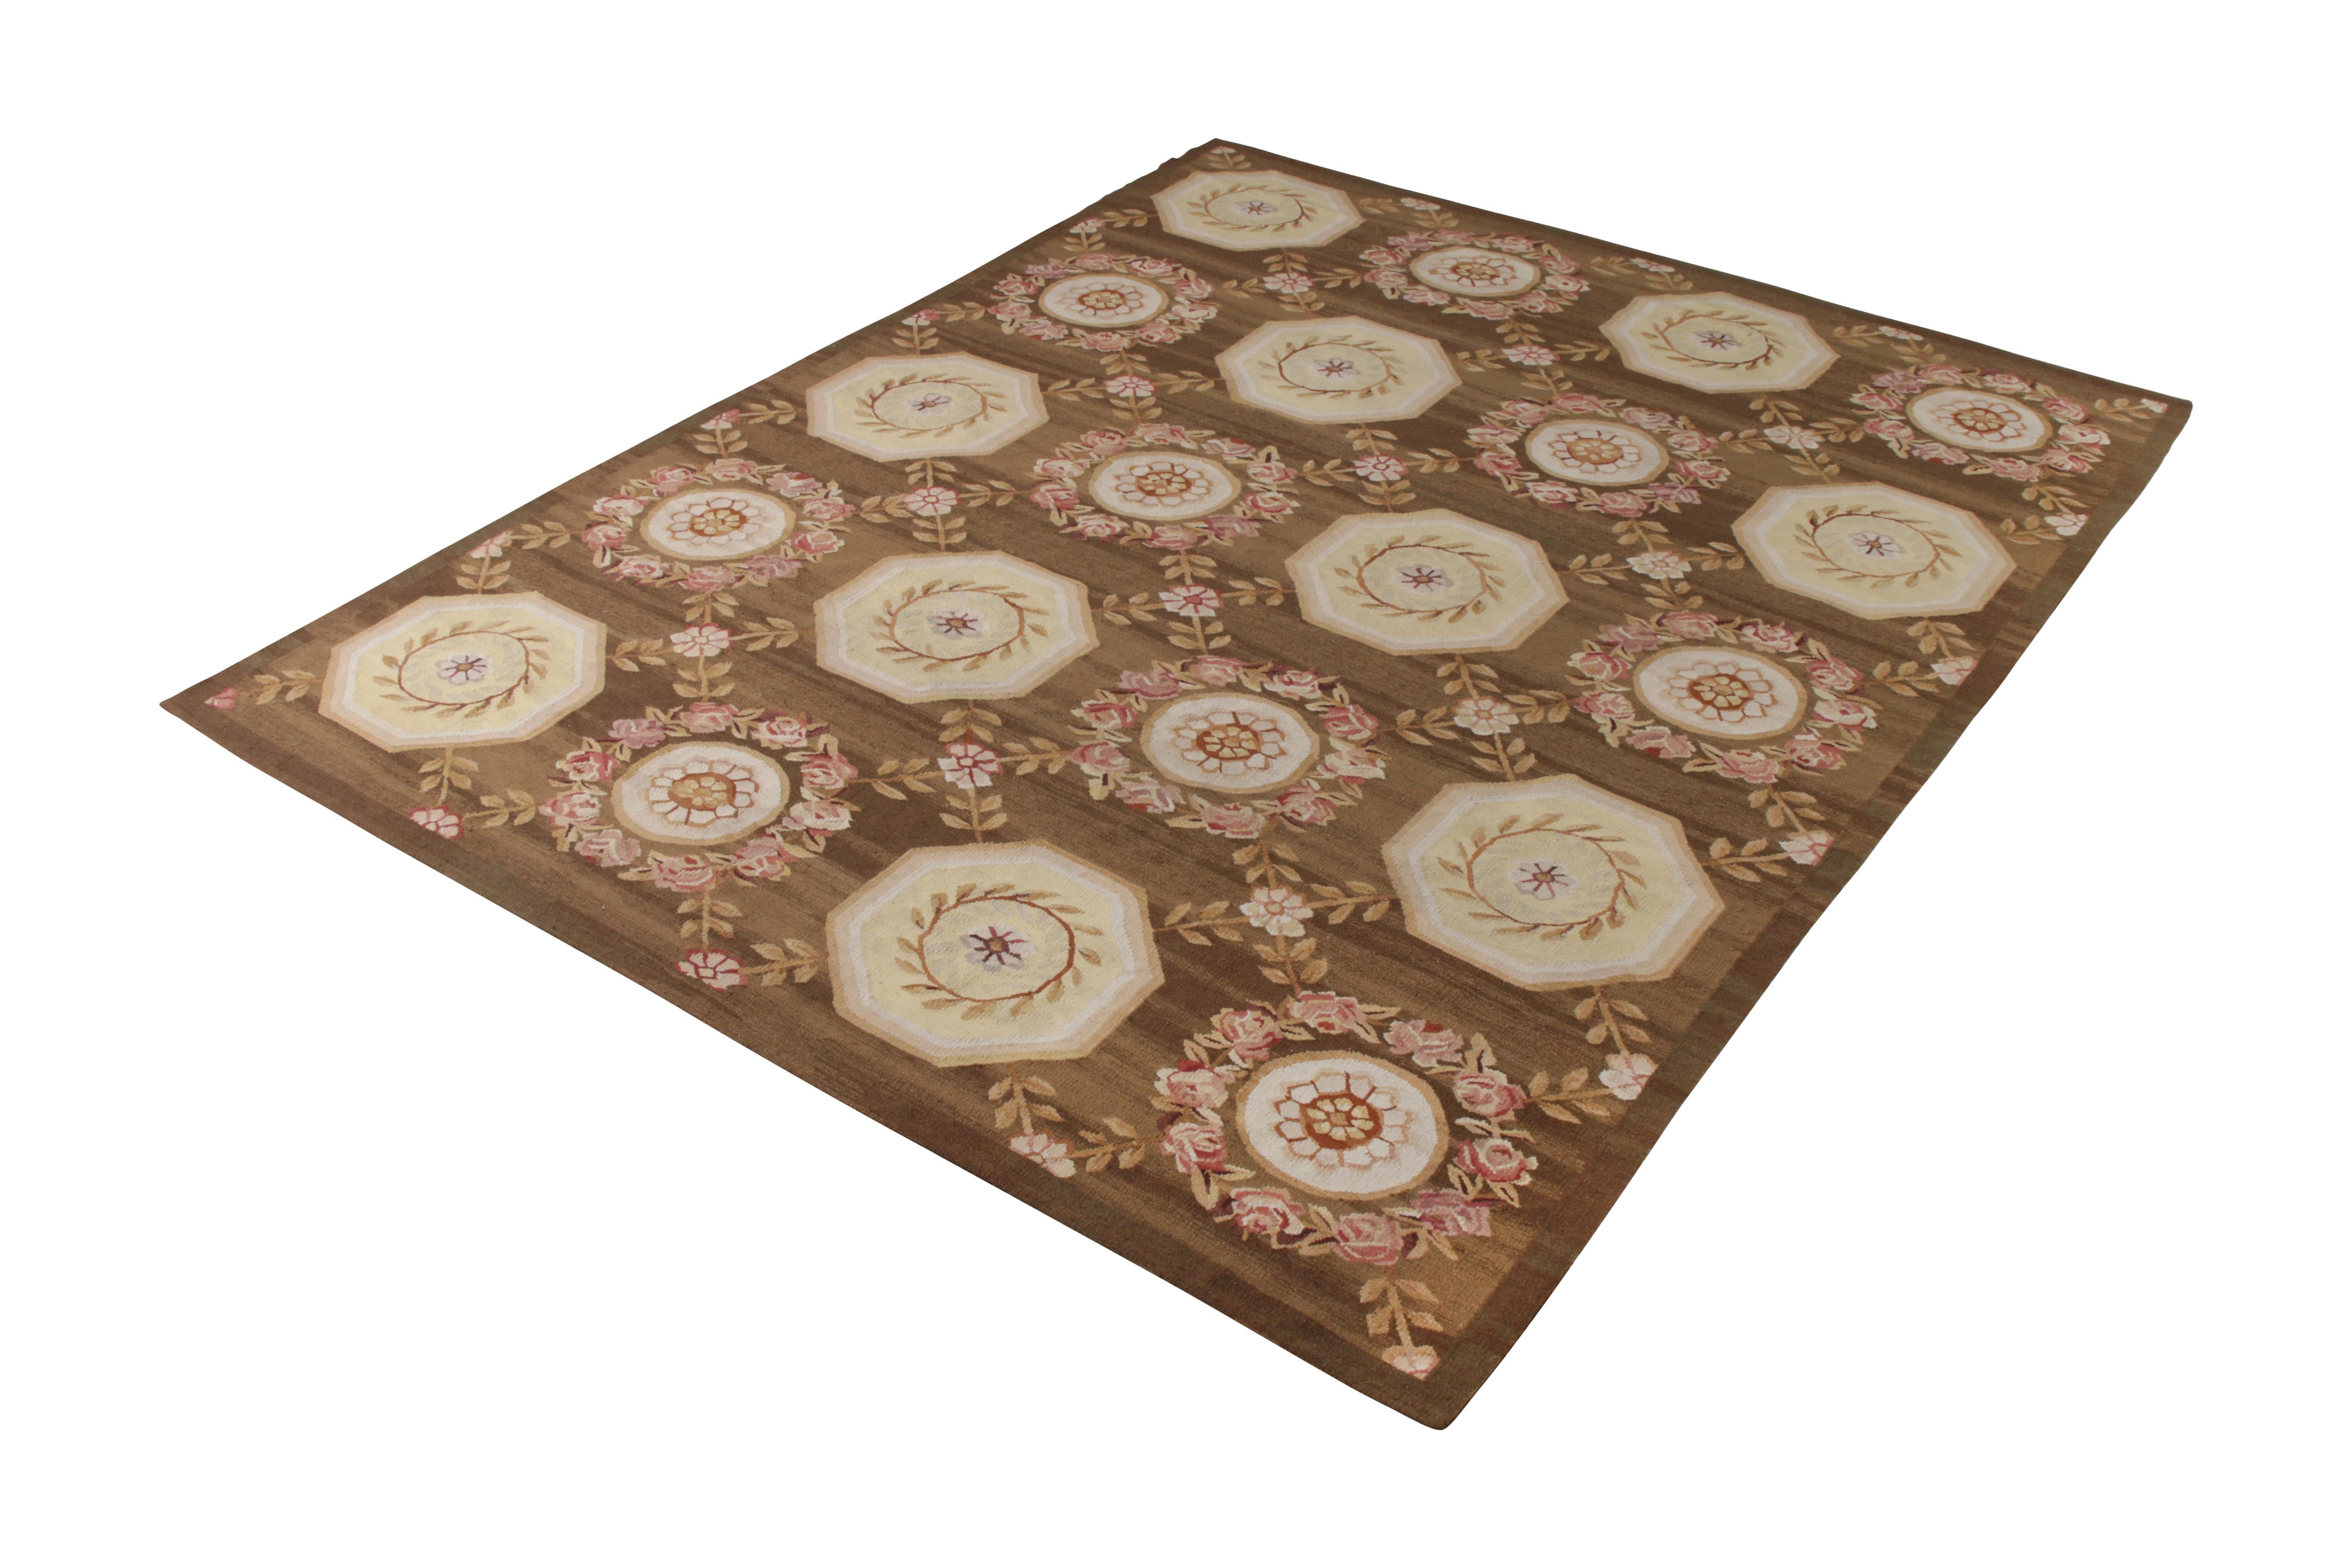 Nepalese Rug & Kilim’s Handmade Aubusson Style Flat-Weave Rug in Brown and Pink For Sale